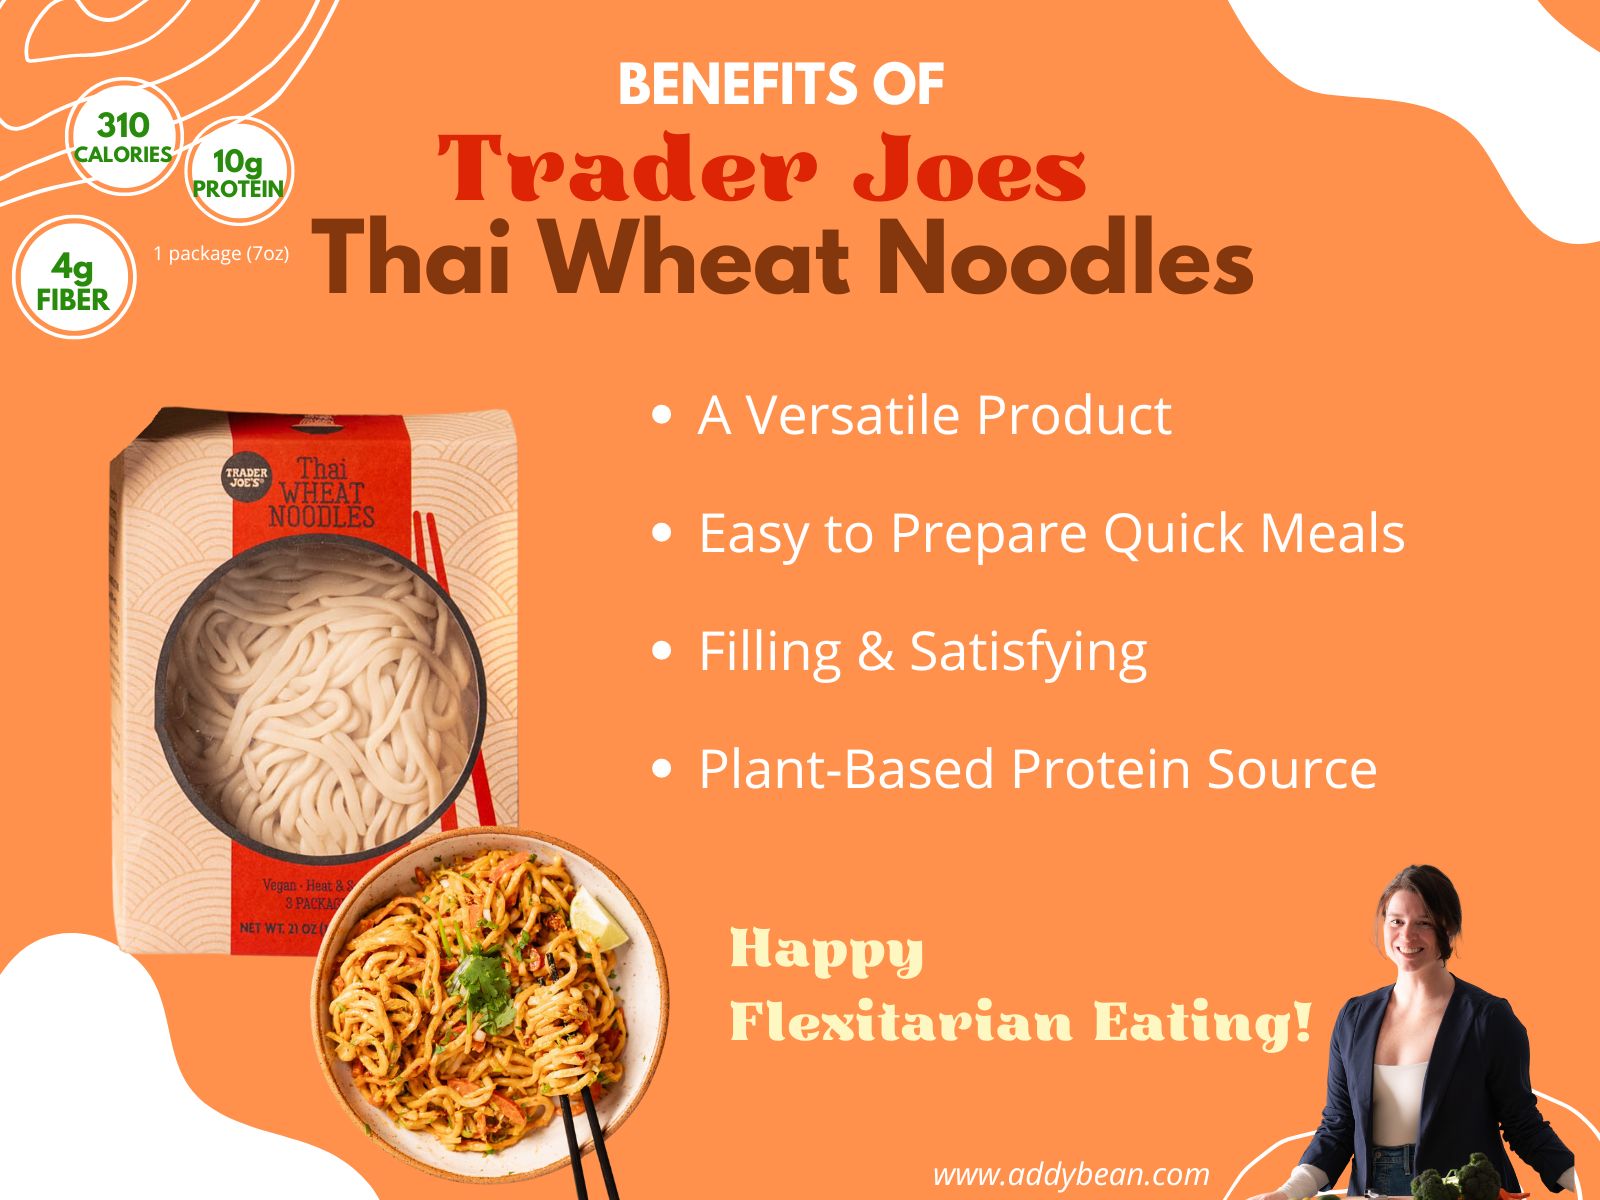 Infographic discussing the benefits of using Trader Joes Thai Wheat Noodles